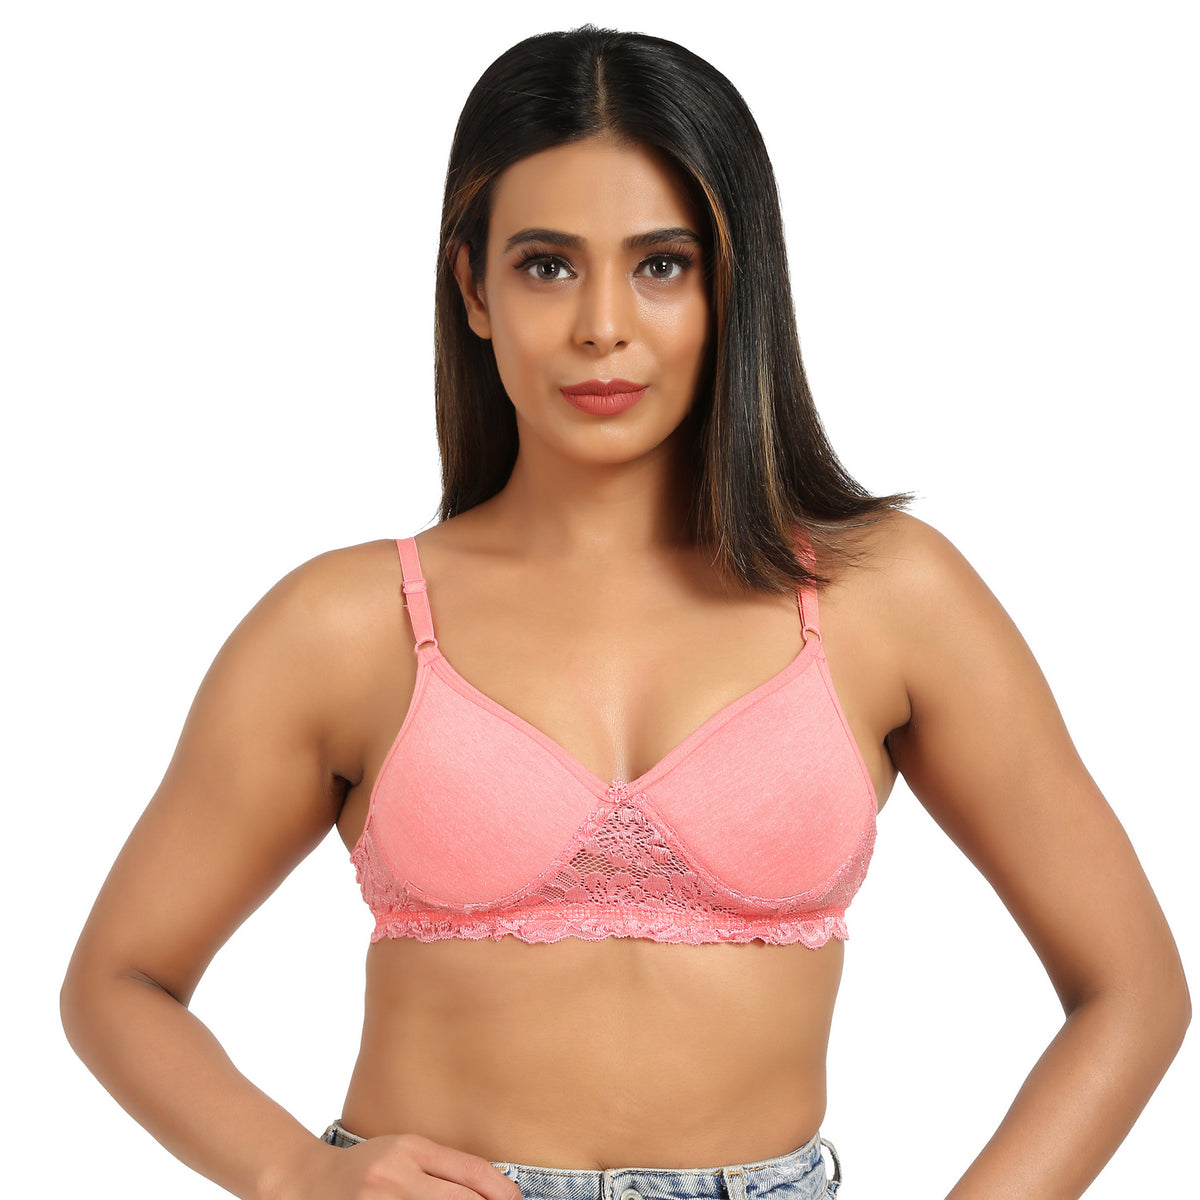 Bruchi Club Lightly Padded Non-Wired Pink T-Shirt Bra with Lace